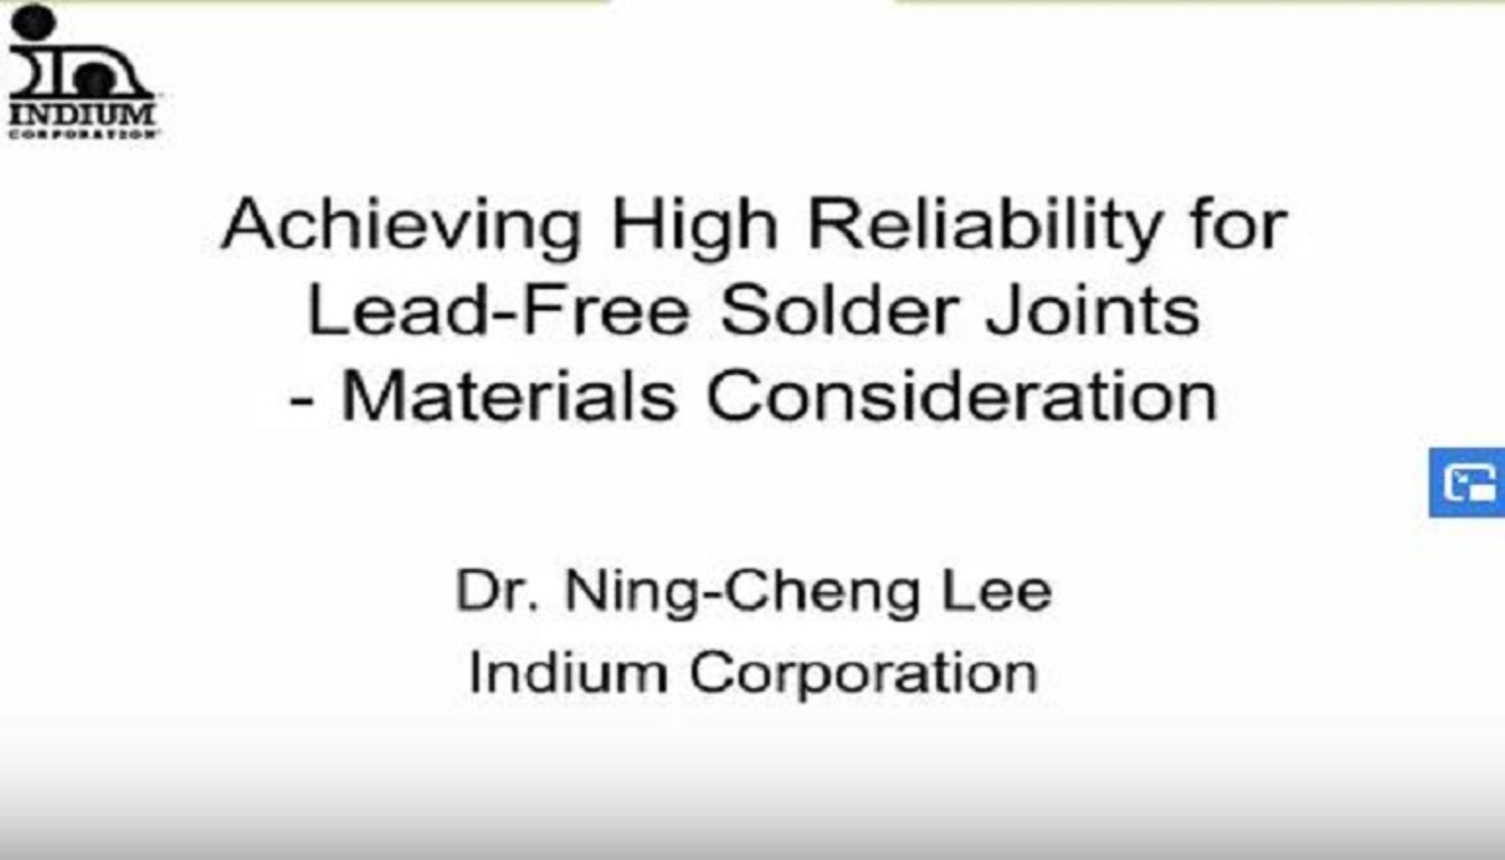 Achieving High Reliability for Lead Free Solder Joints - Materials Consideration